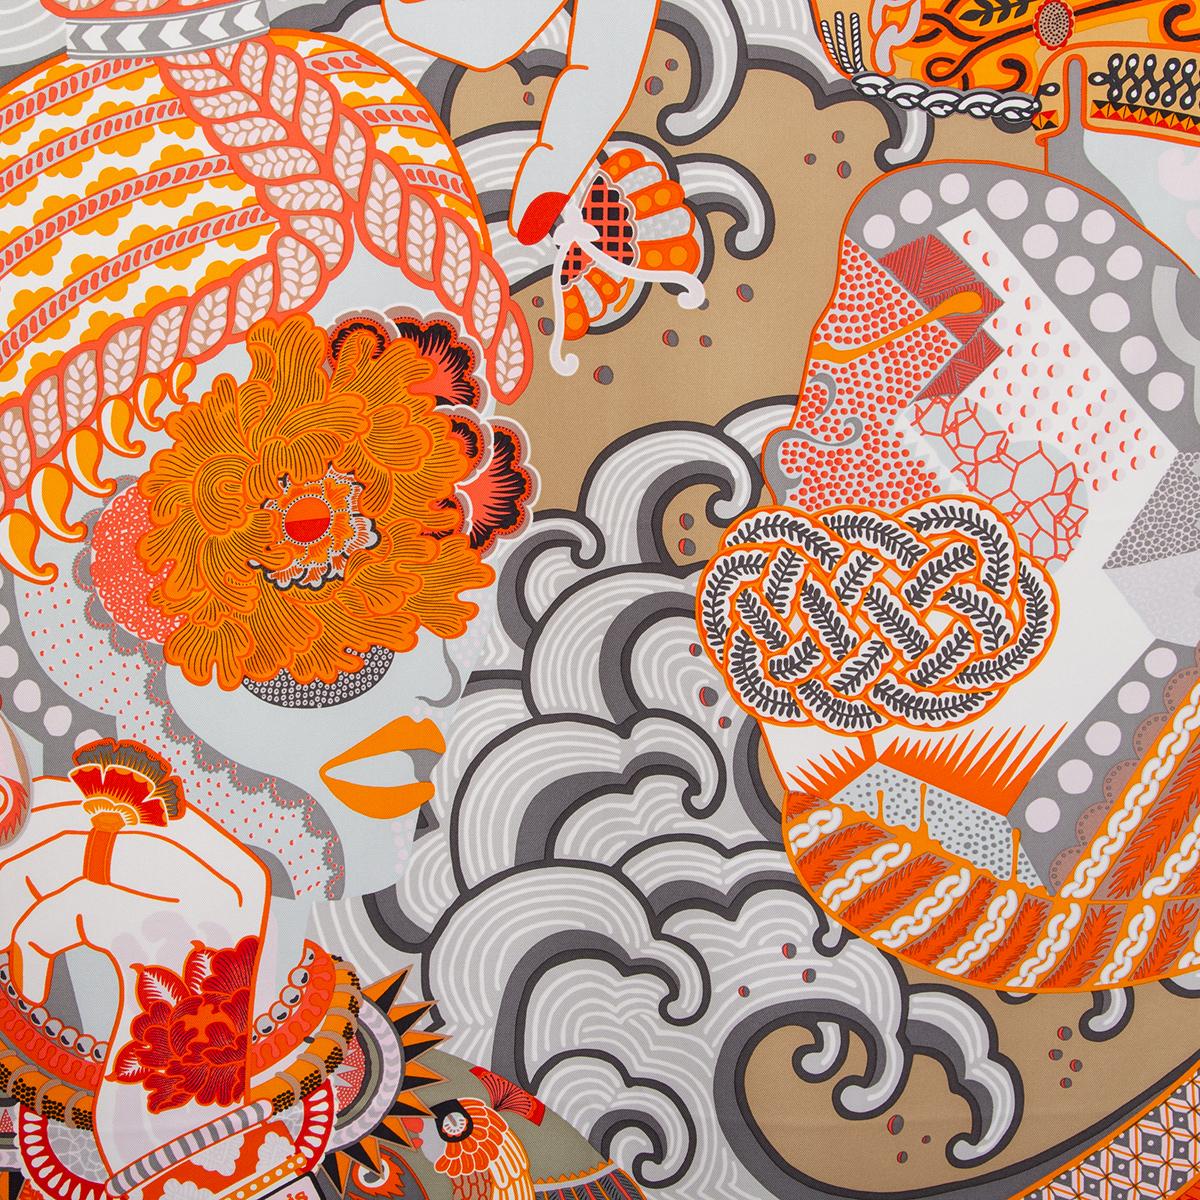 100% authentic Hermès 'Duo Cosmique 90' scarf by Kohei Kyomori in orange silk twill (100%) with a caramel border and details in grey, white, yellow and red. Brand new. 

Issued in Fall/Winter 2021.

In Tantric Buddhism, 